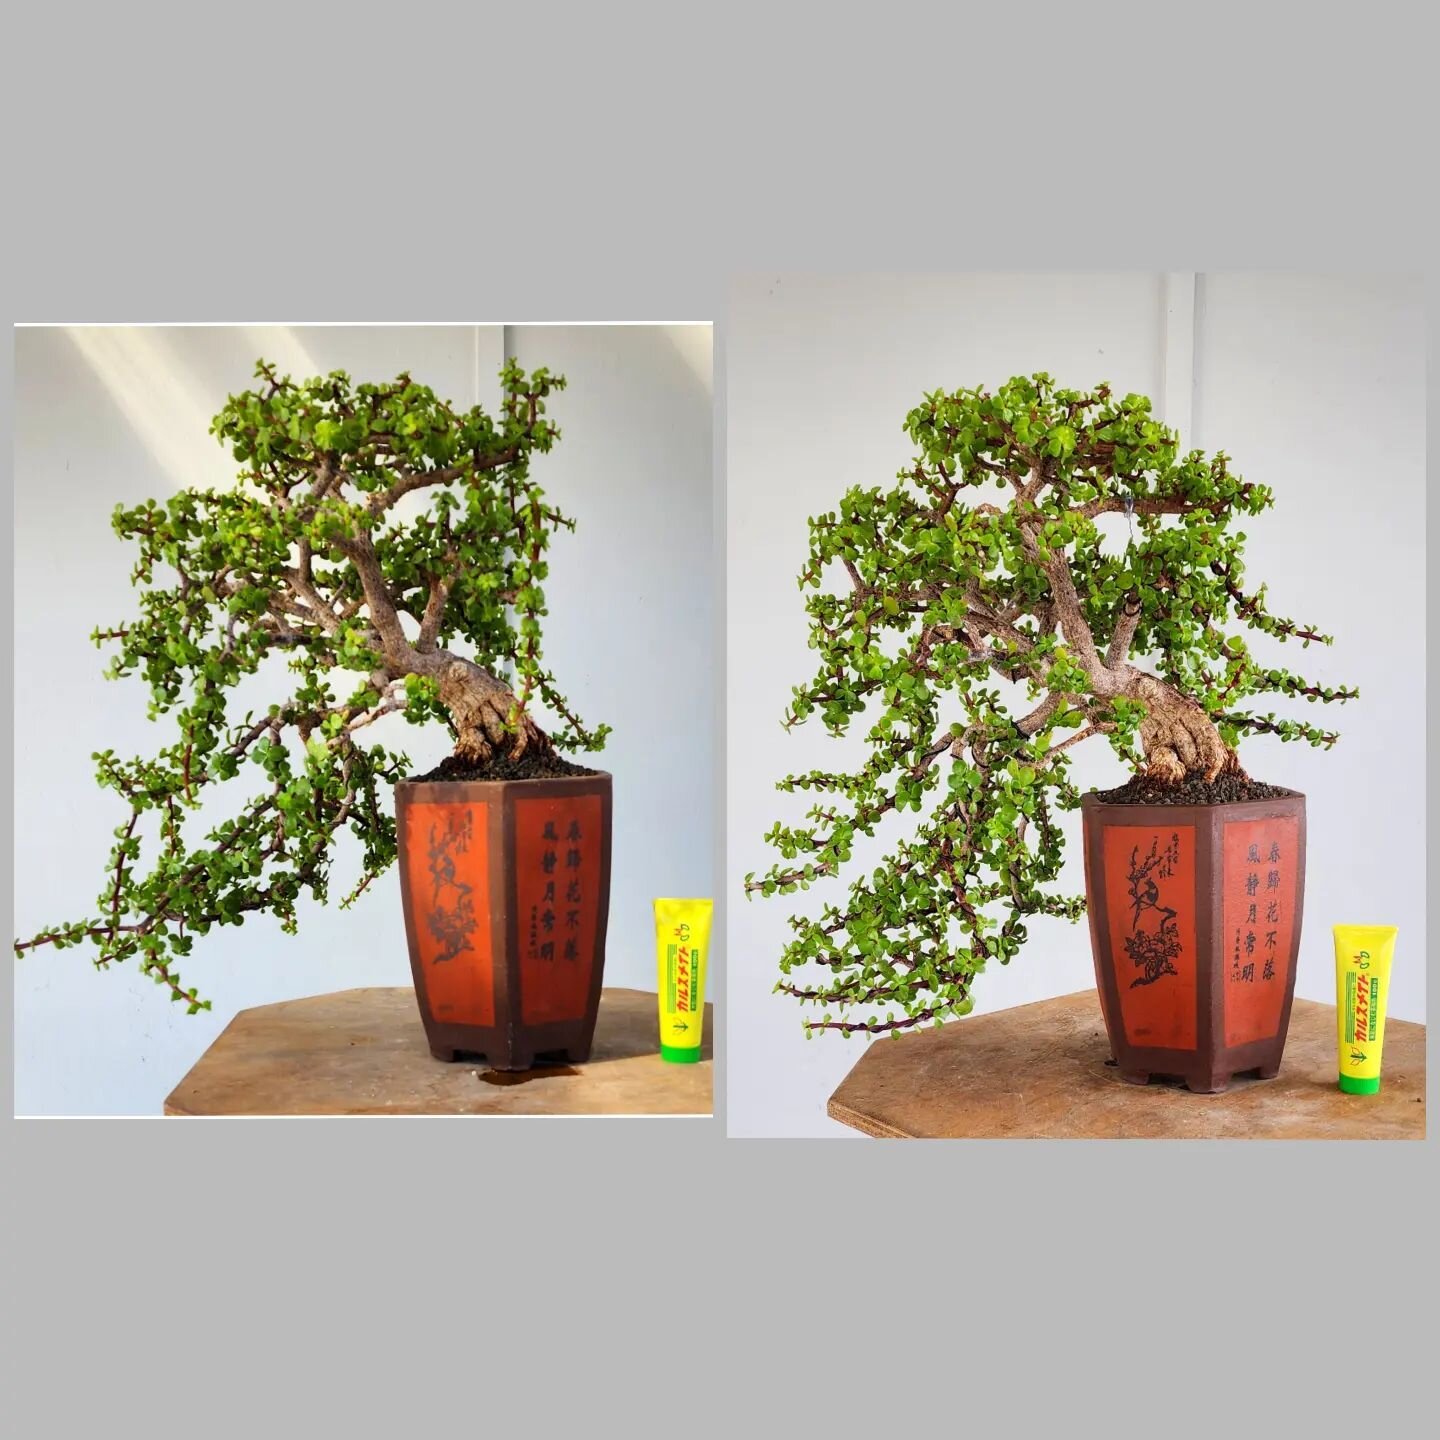 Before and after styling
#highdesertbonsai
#bonsai